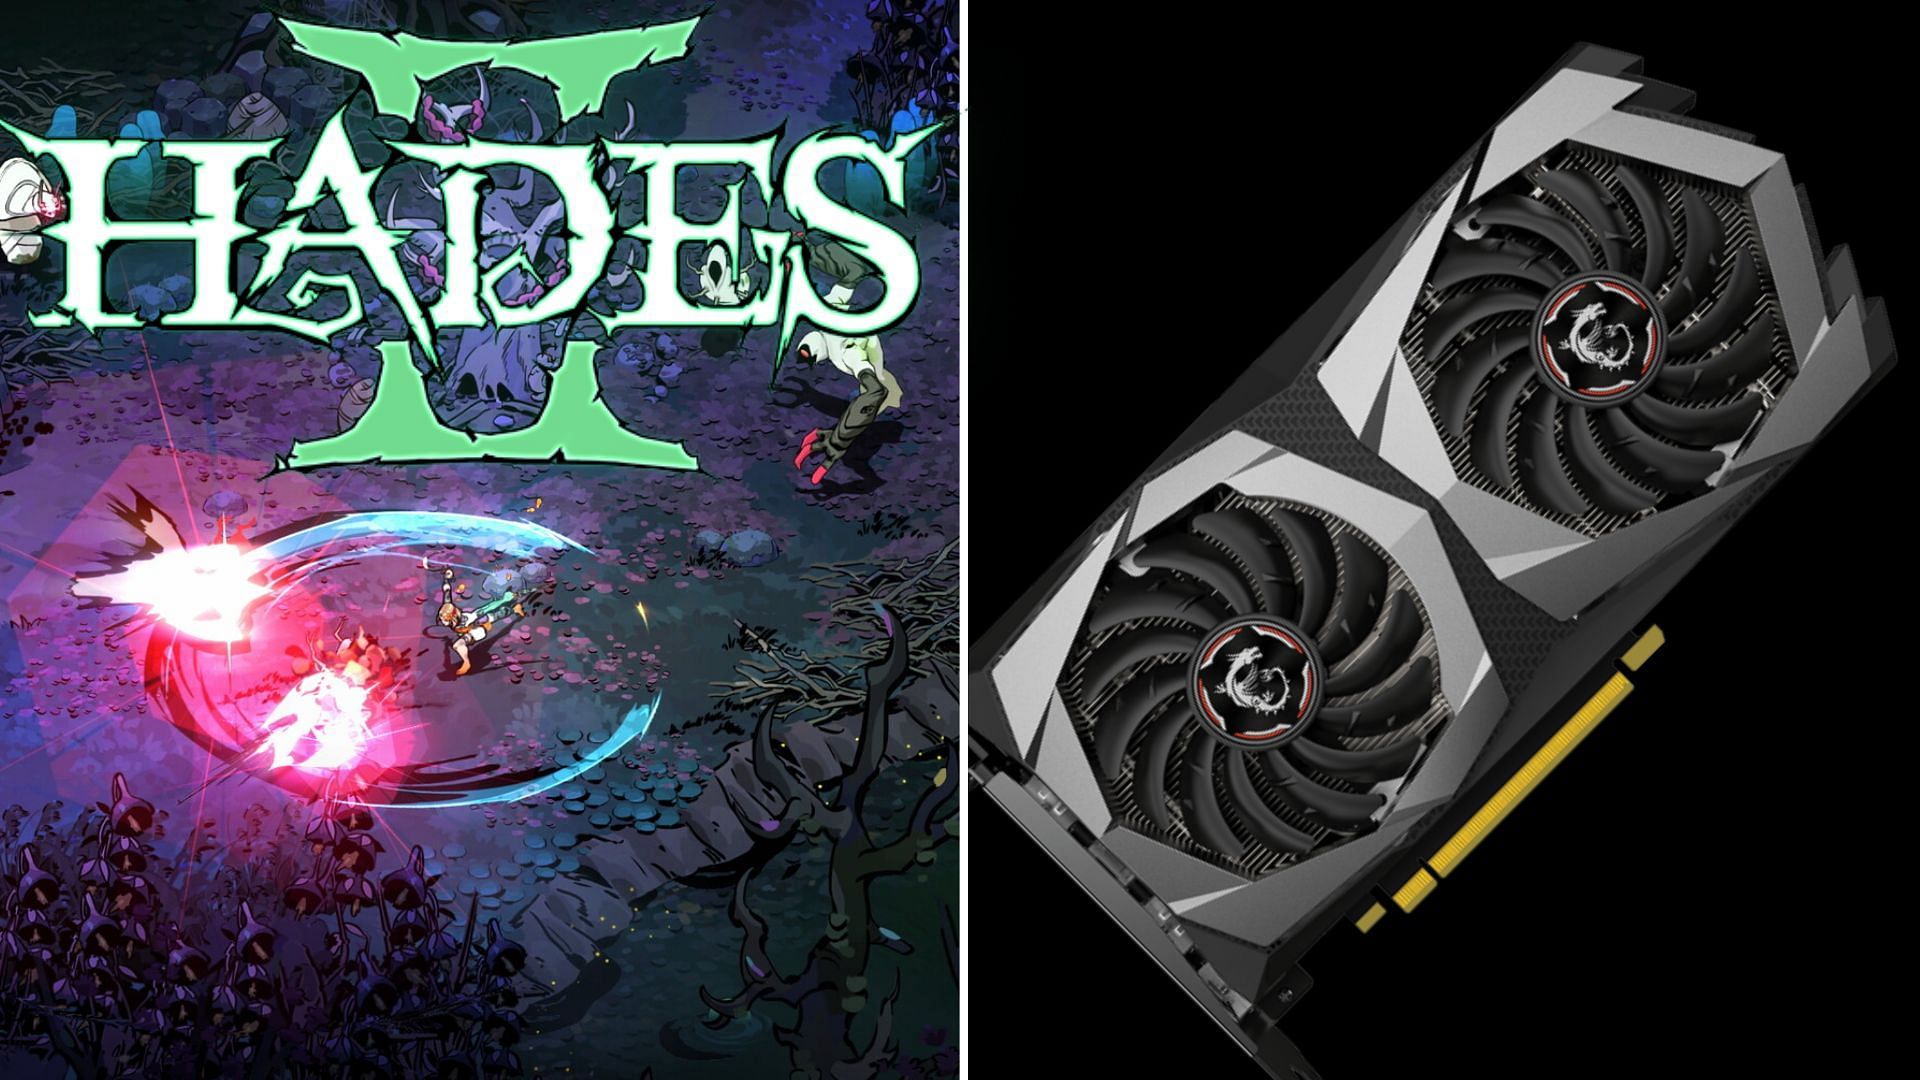 The GTX 1650 and 1650 Super can play Hades 2 with some tweaks (Image via Supergiant Games and MSI)